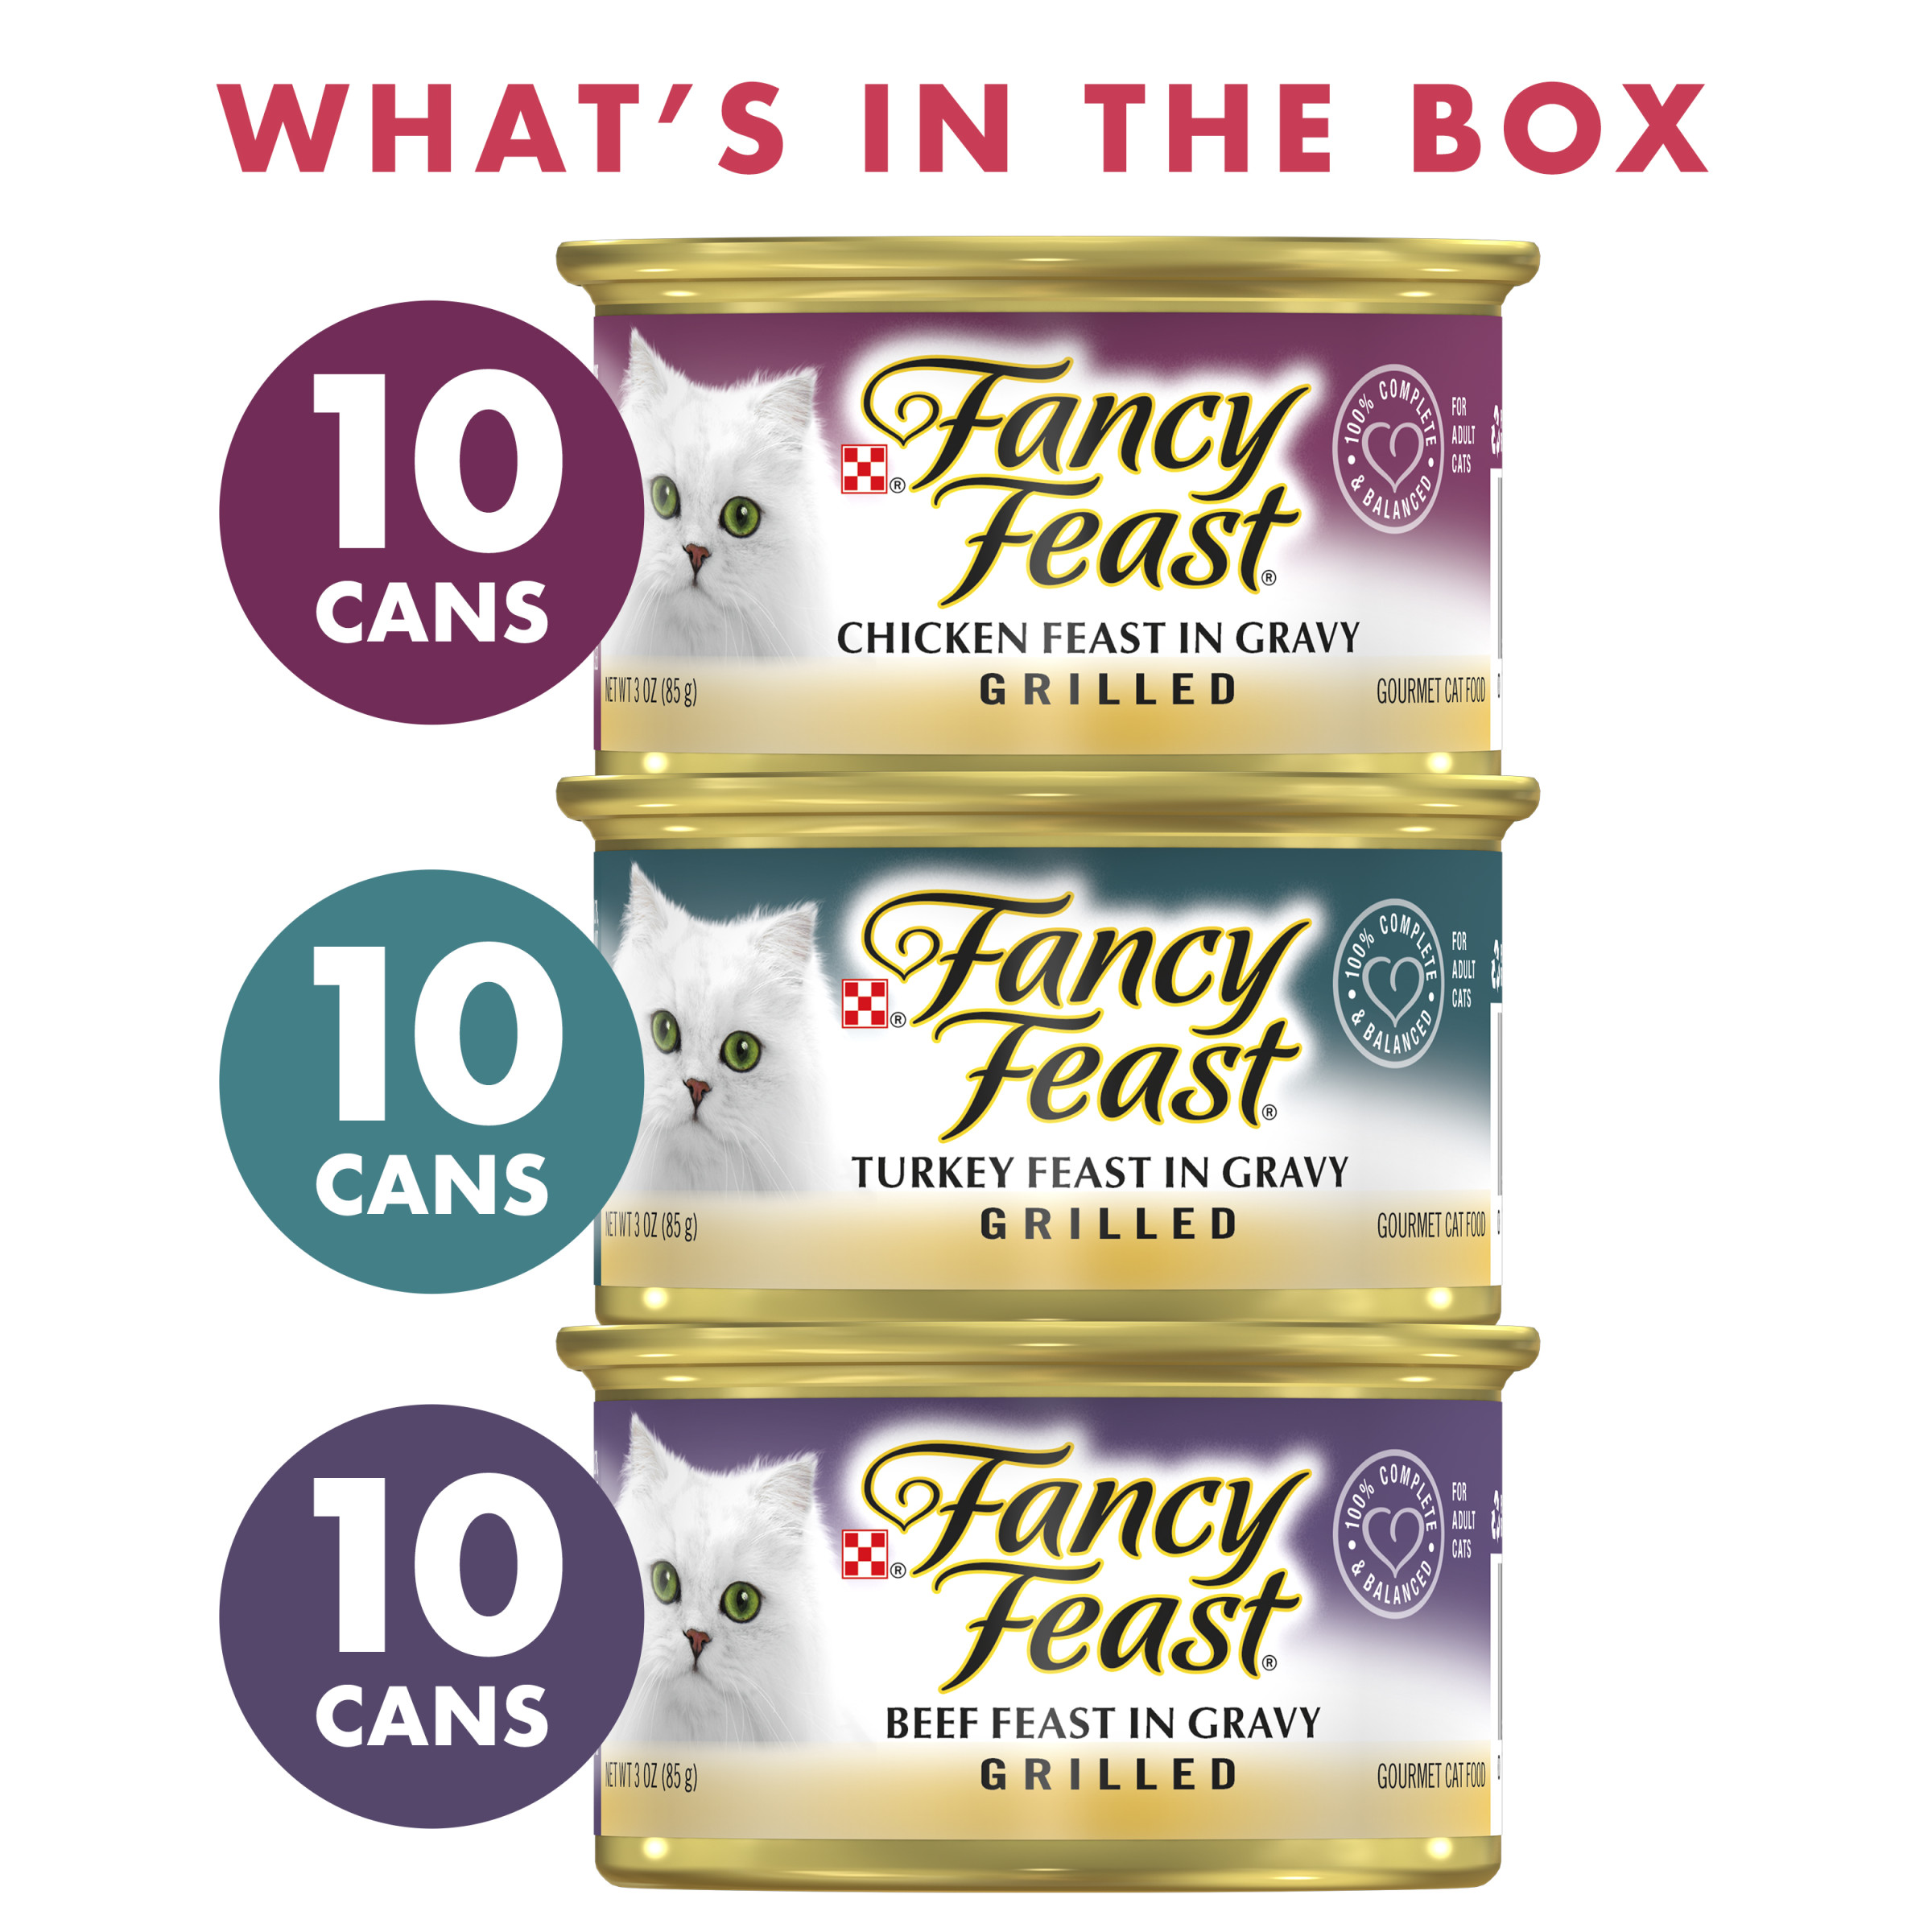 Purina Fancy Feast Wet Cat Food, Poultry & Beef Grilled Collection Variety Pack, 3 oz. Cans (30 Pack) - image 4 of 10